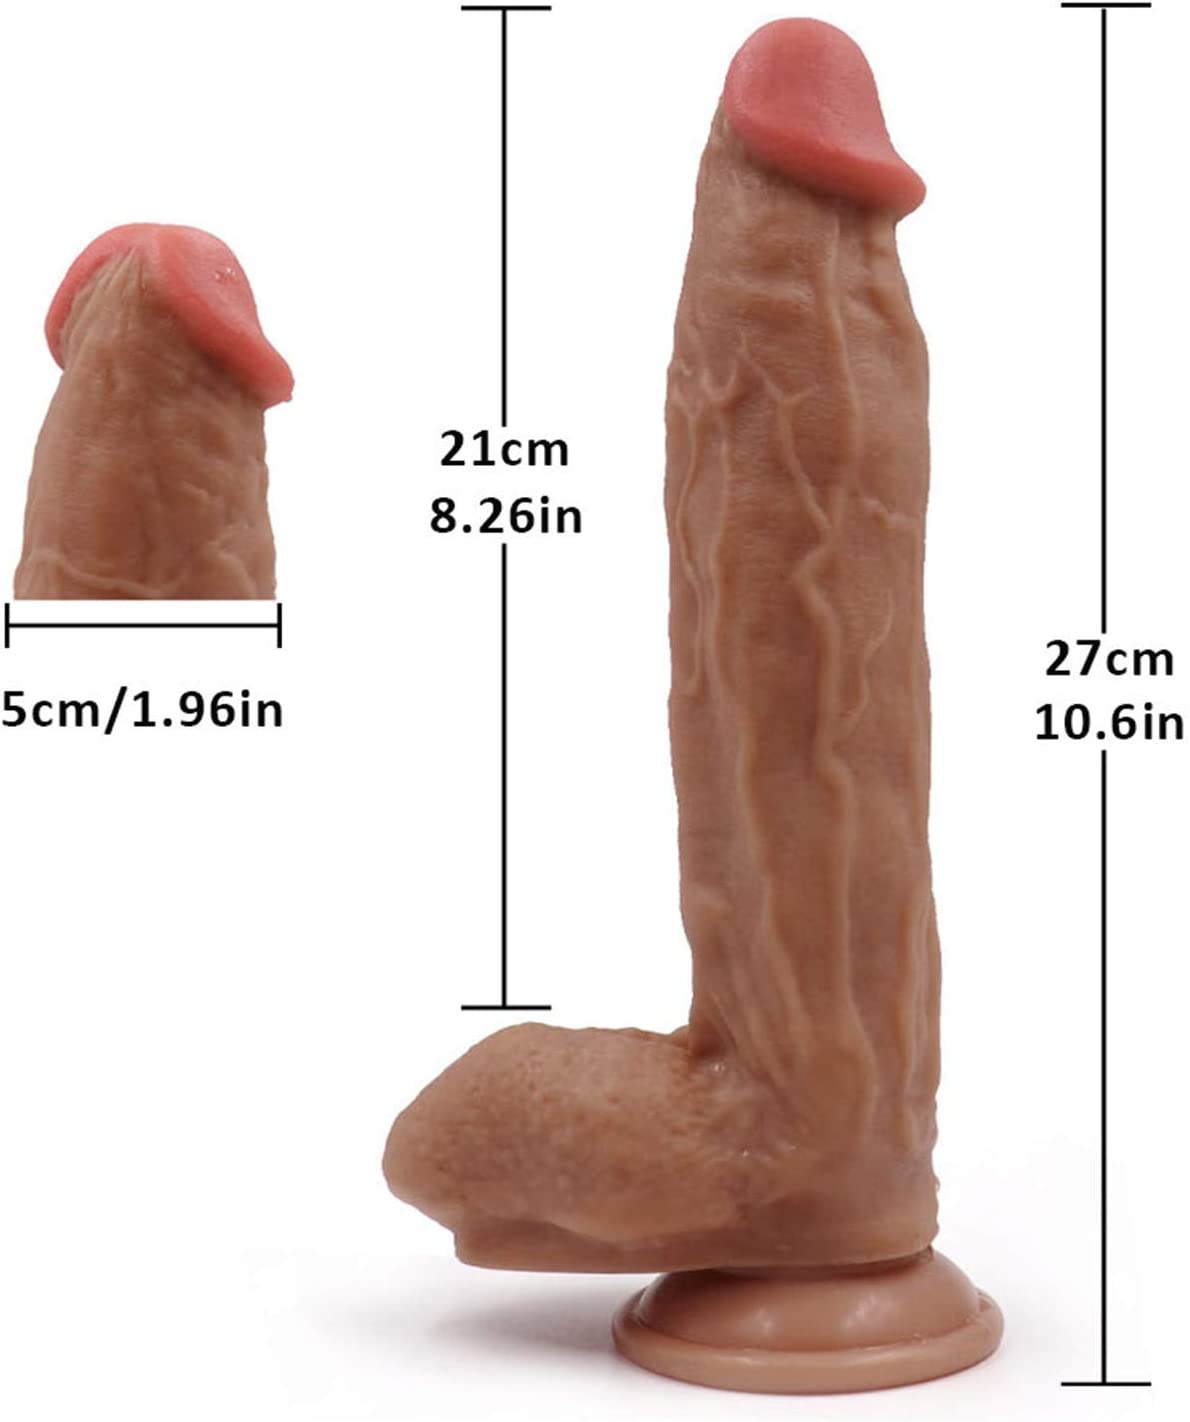 Best 10 inches Dildo for Women